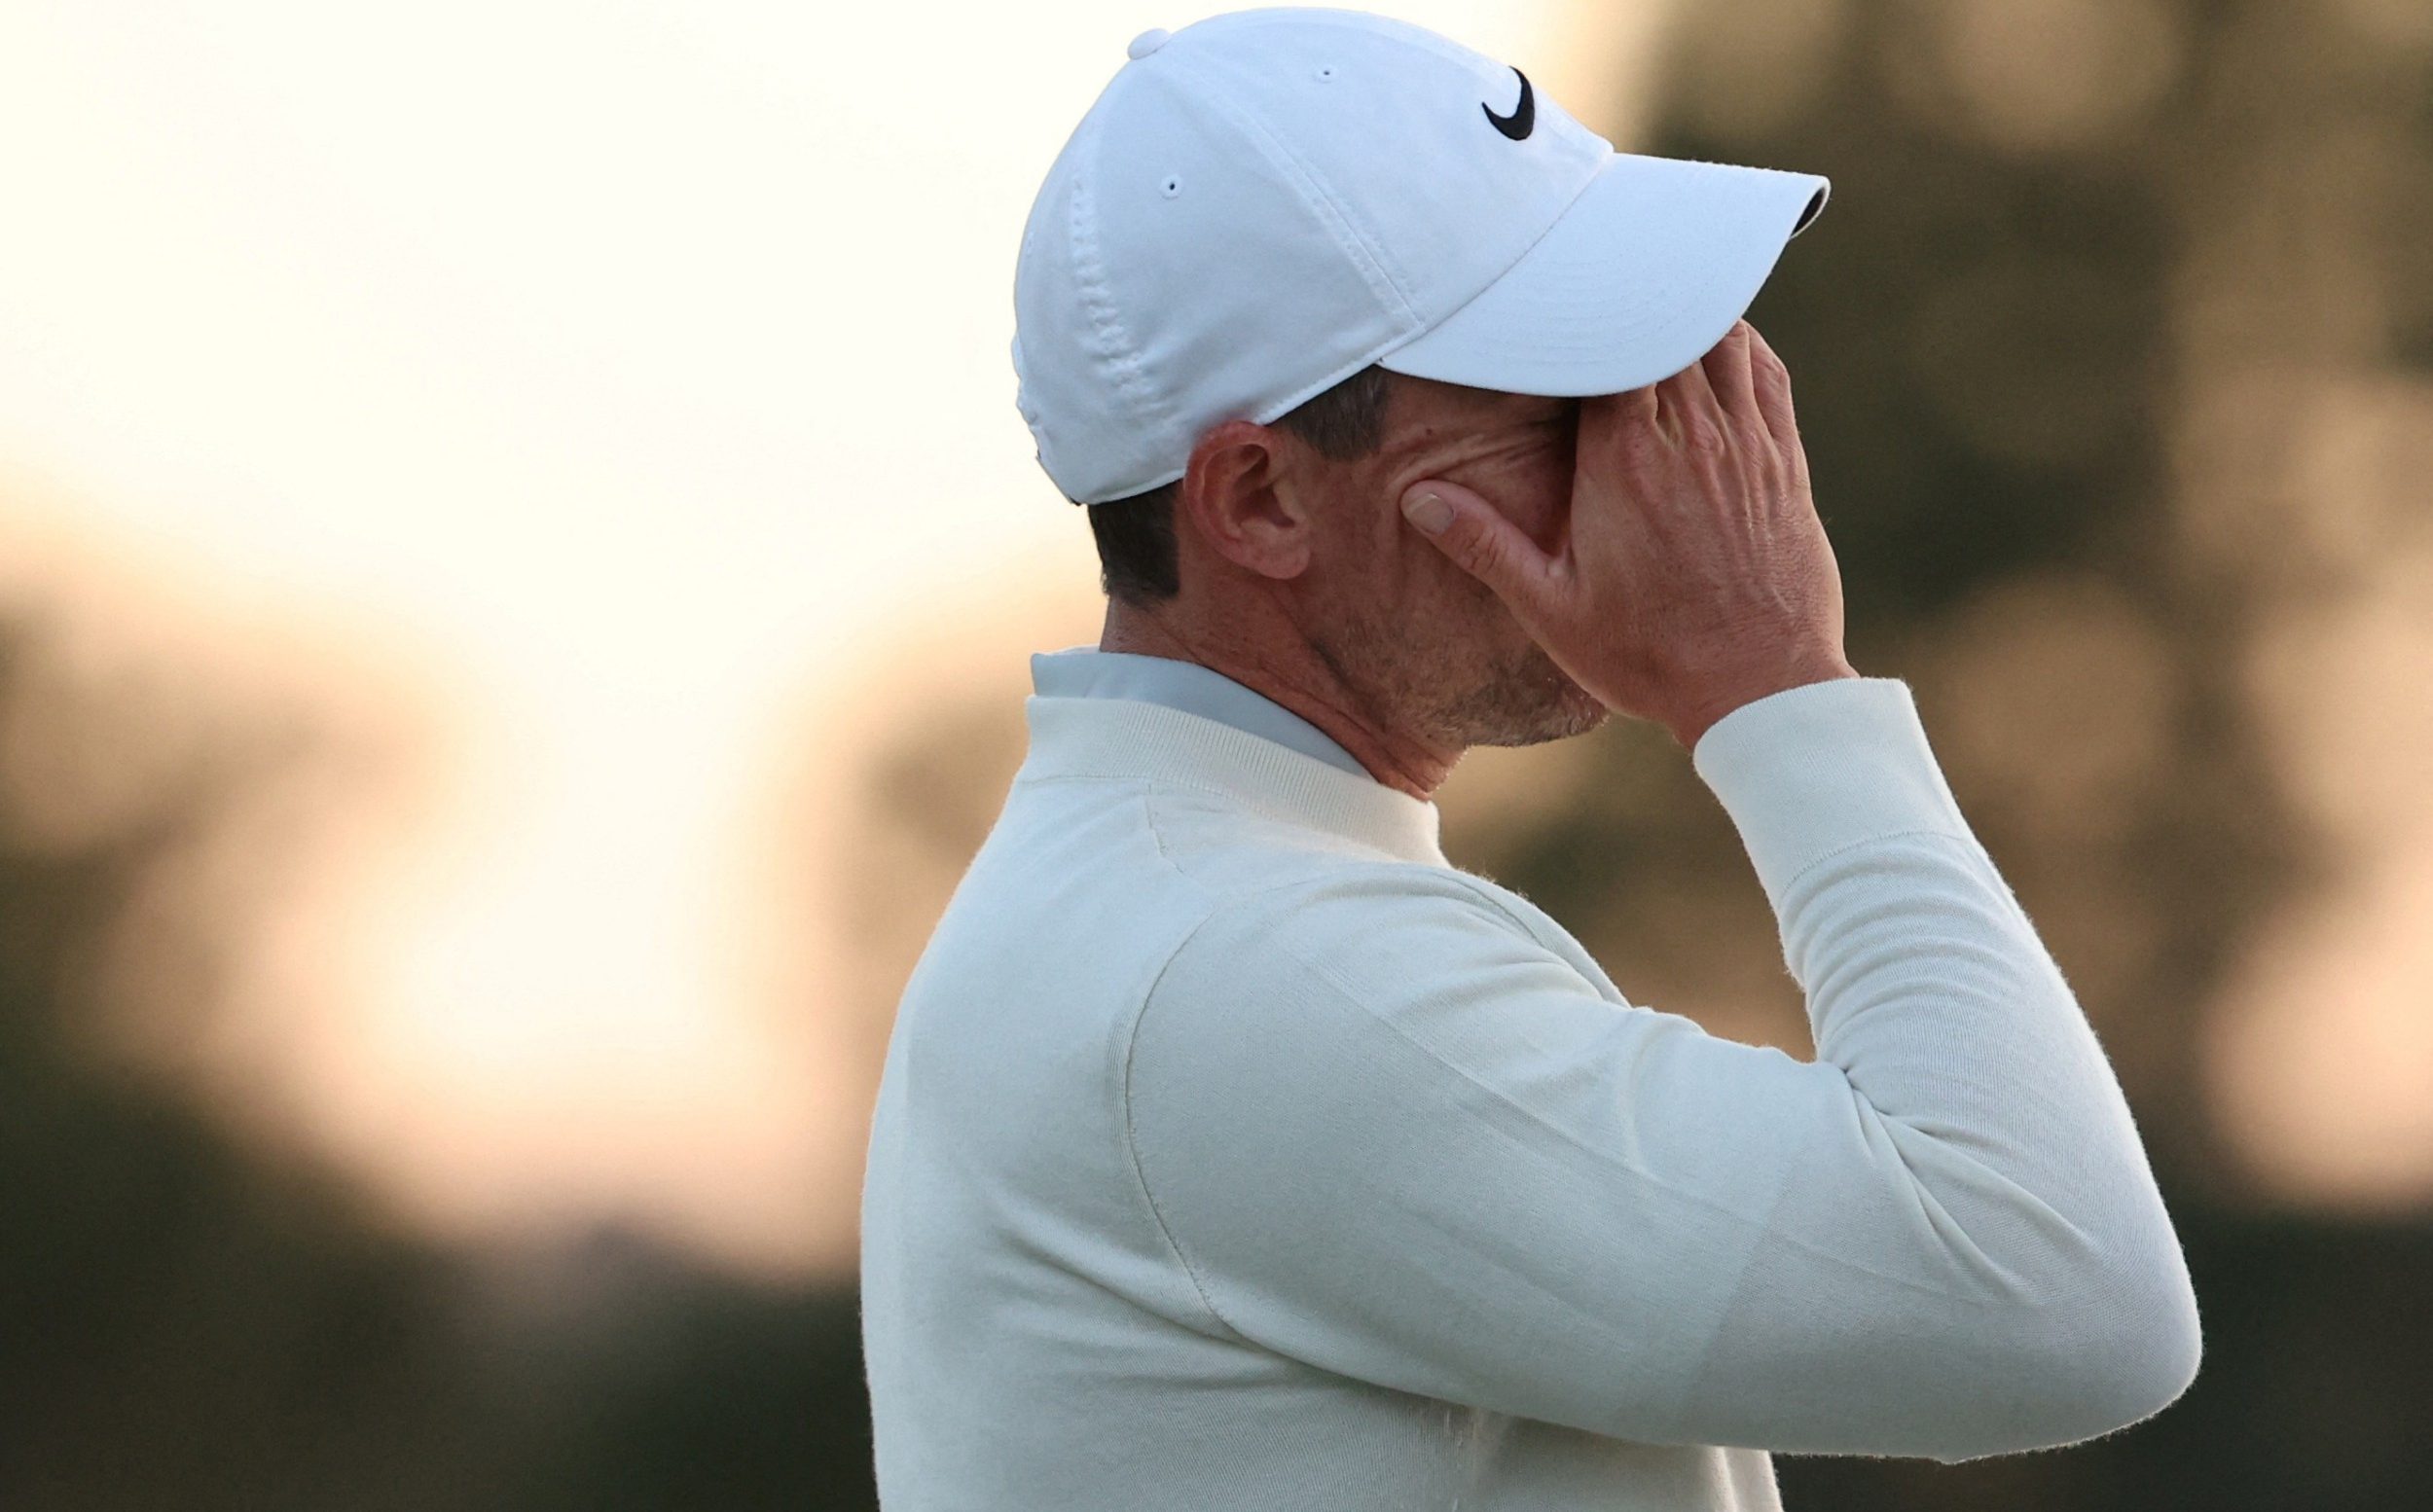 brutal reality is that in quest for legend status, rory mcilroy is falling behind fast